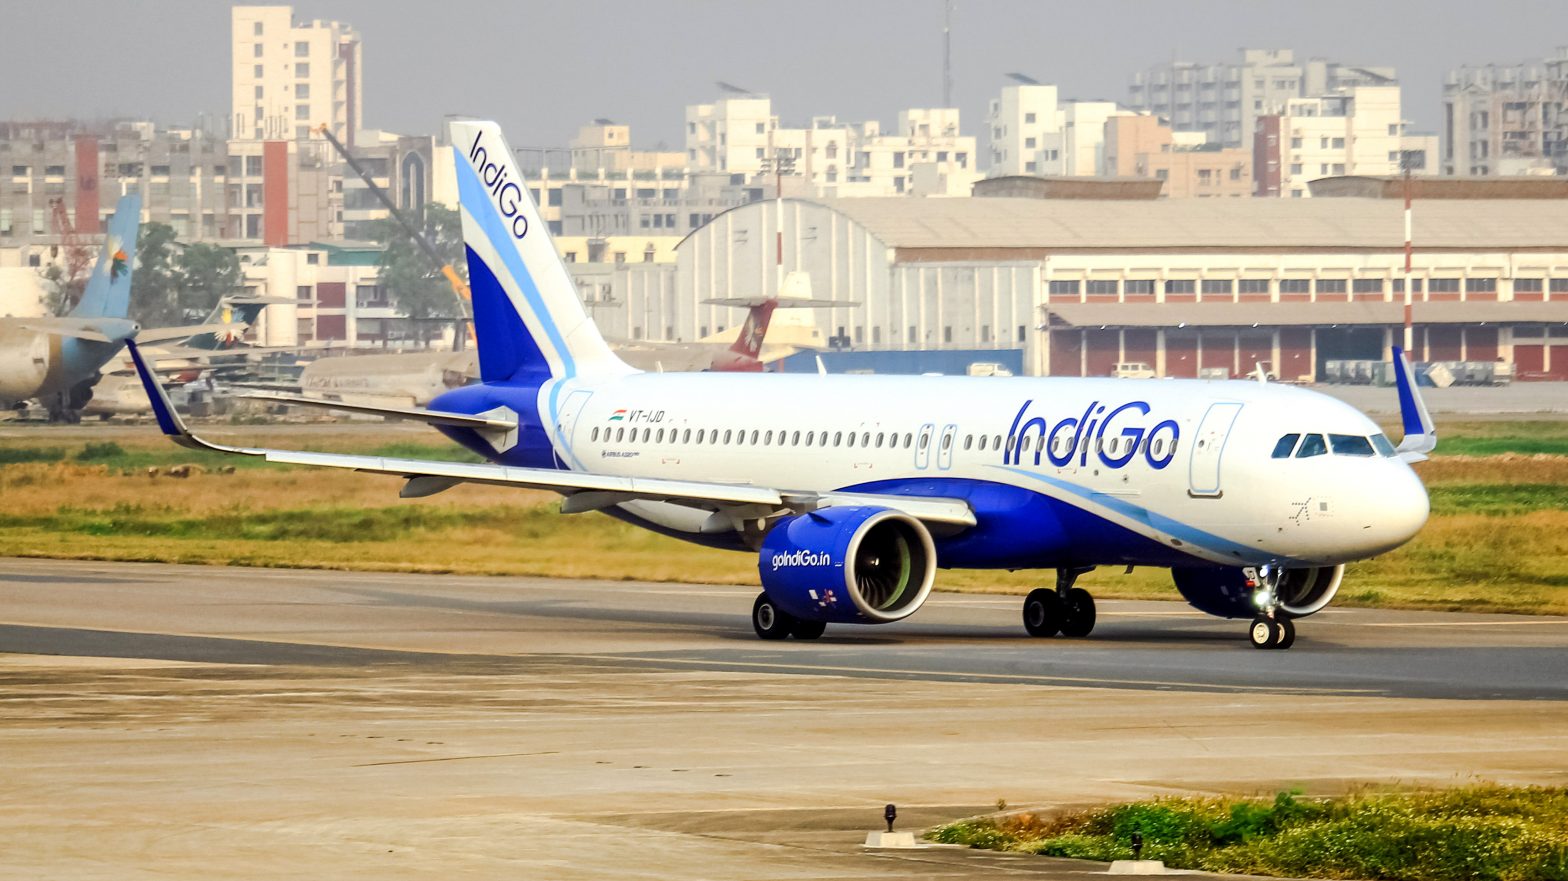 Just Days After Passenger Protests, IndiGo Plane Halts Operations At Delhi Airport For 15 Min Due To Missing Taxiway